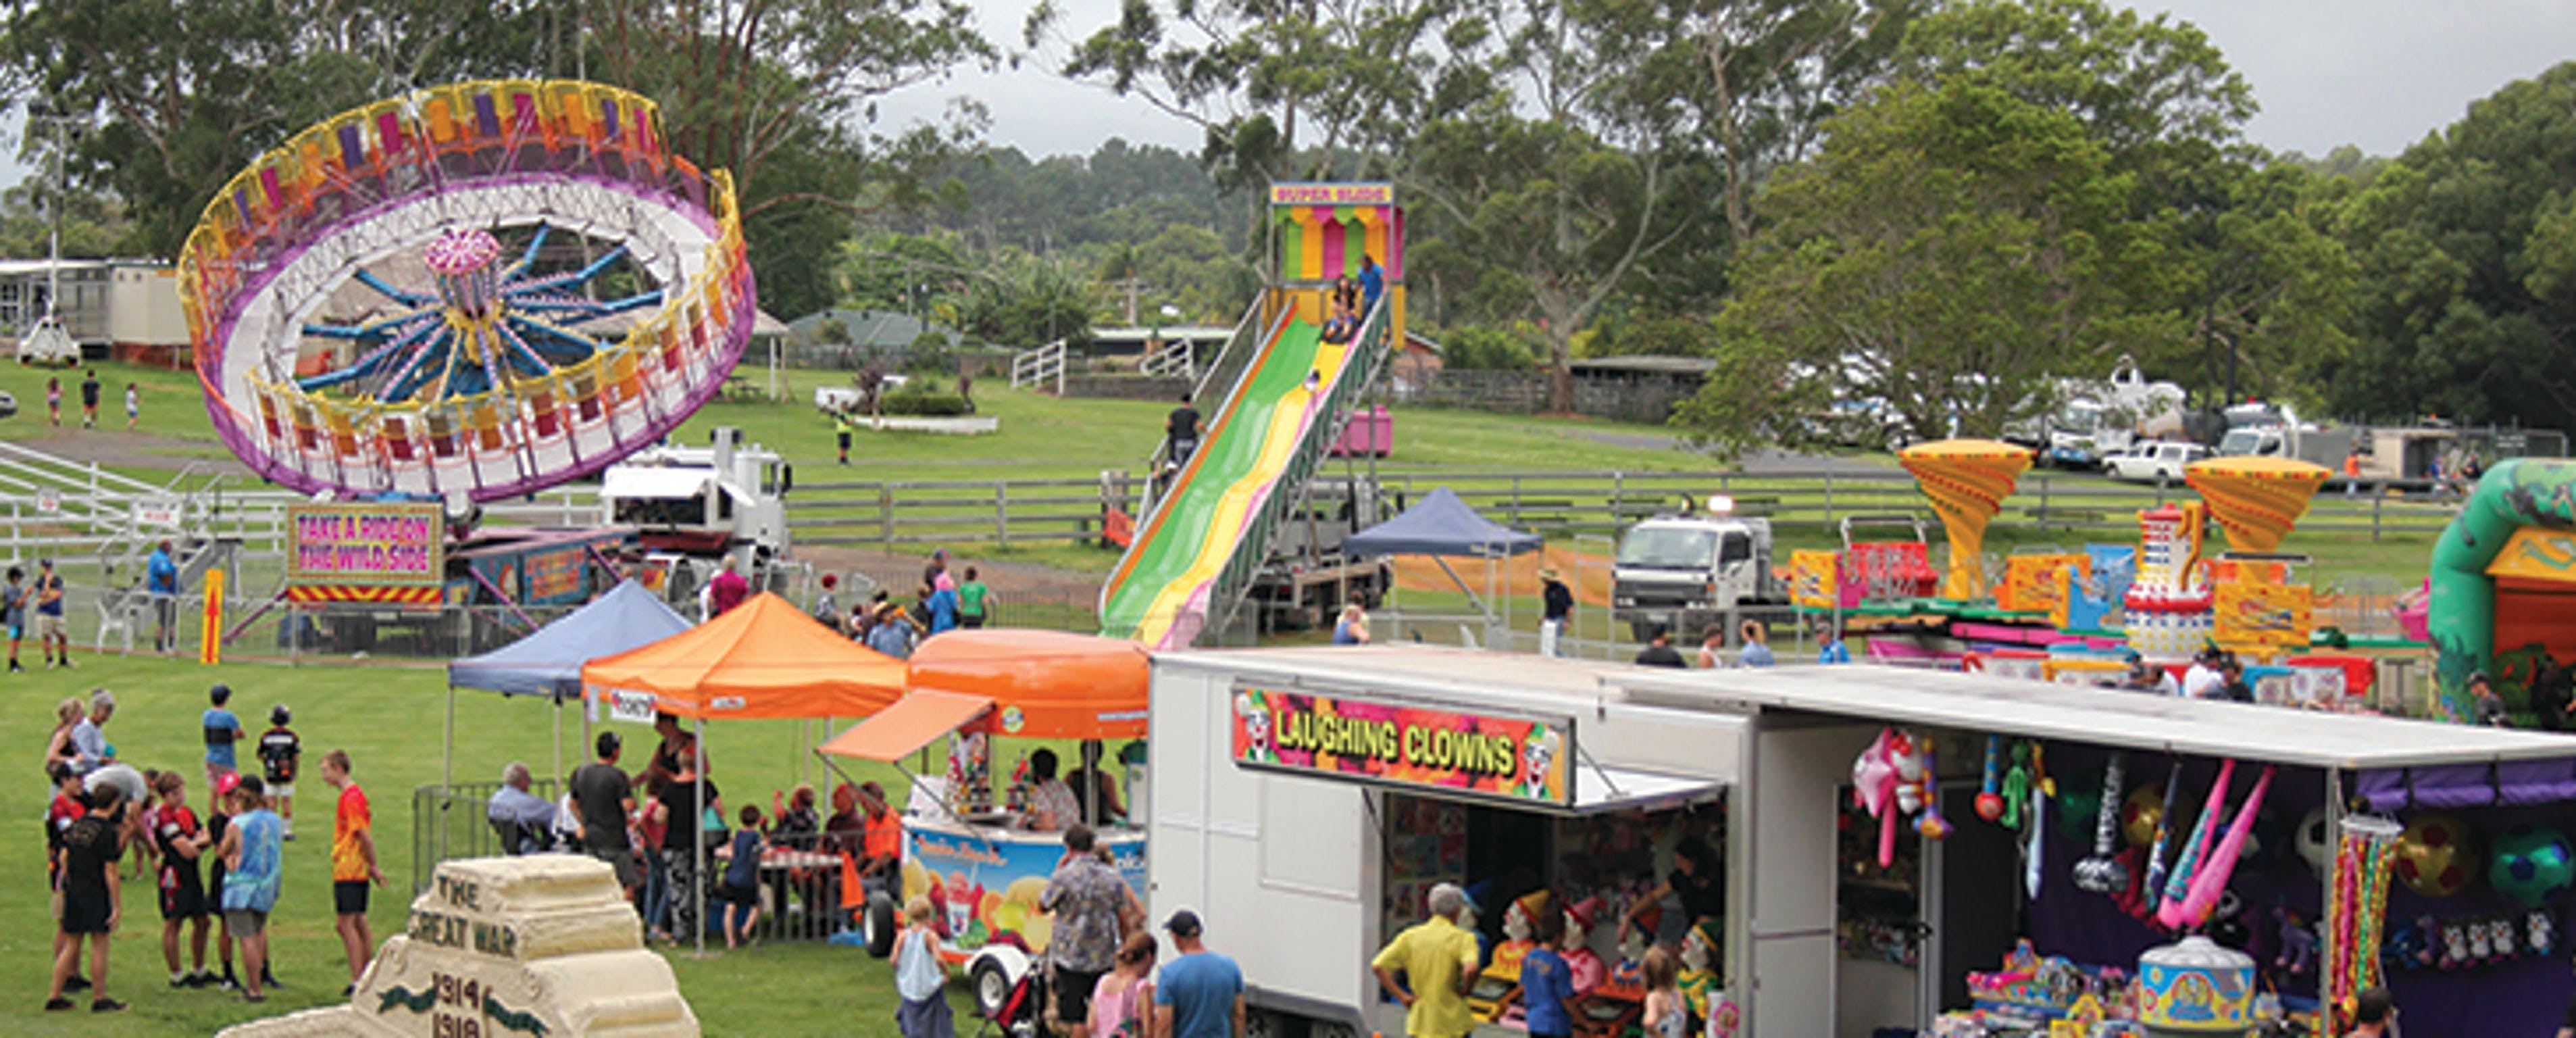 Alstonville Agricultural Society Show - Melbourne Tourism